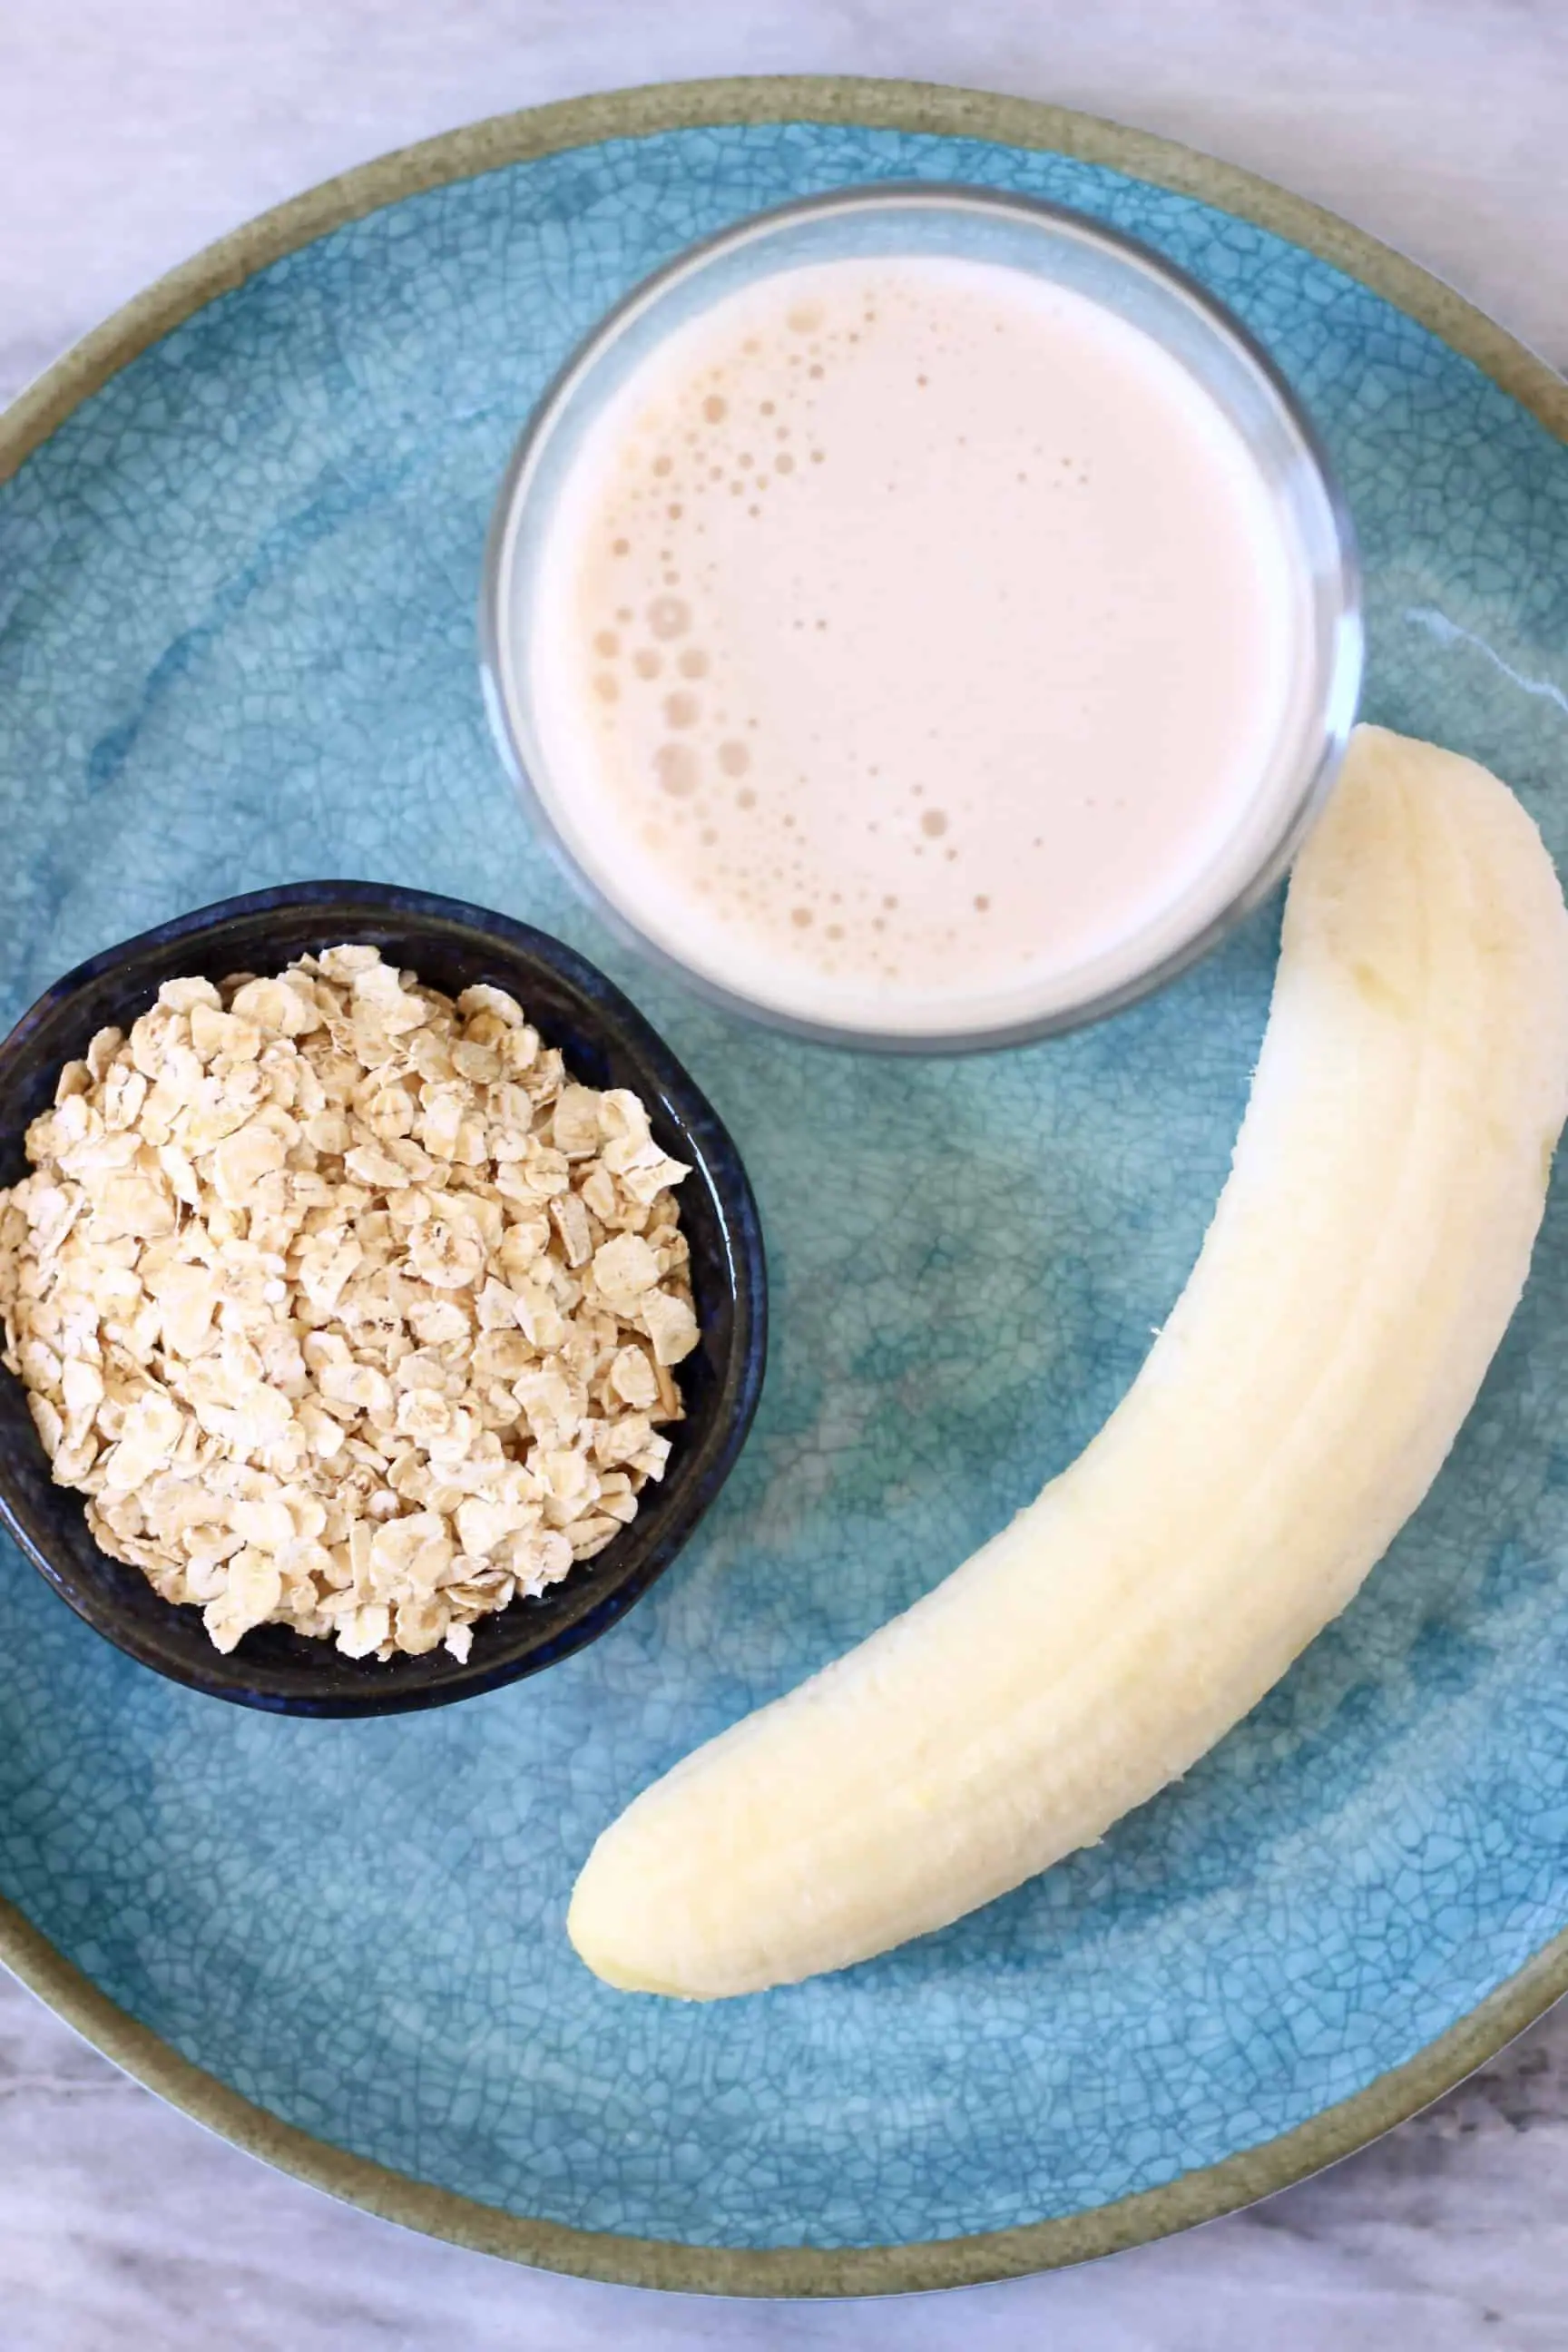 Oats, a peeled banana and a cup of almond milk on a blue plate